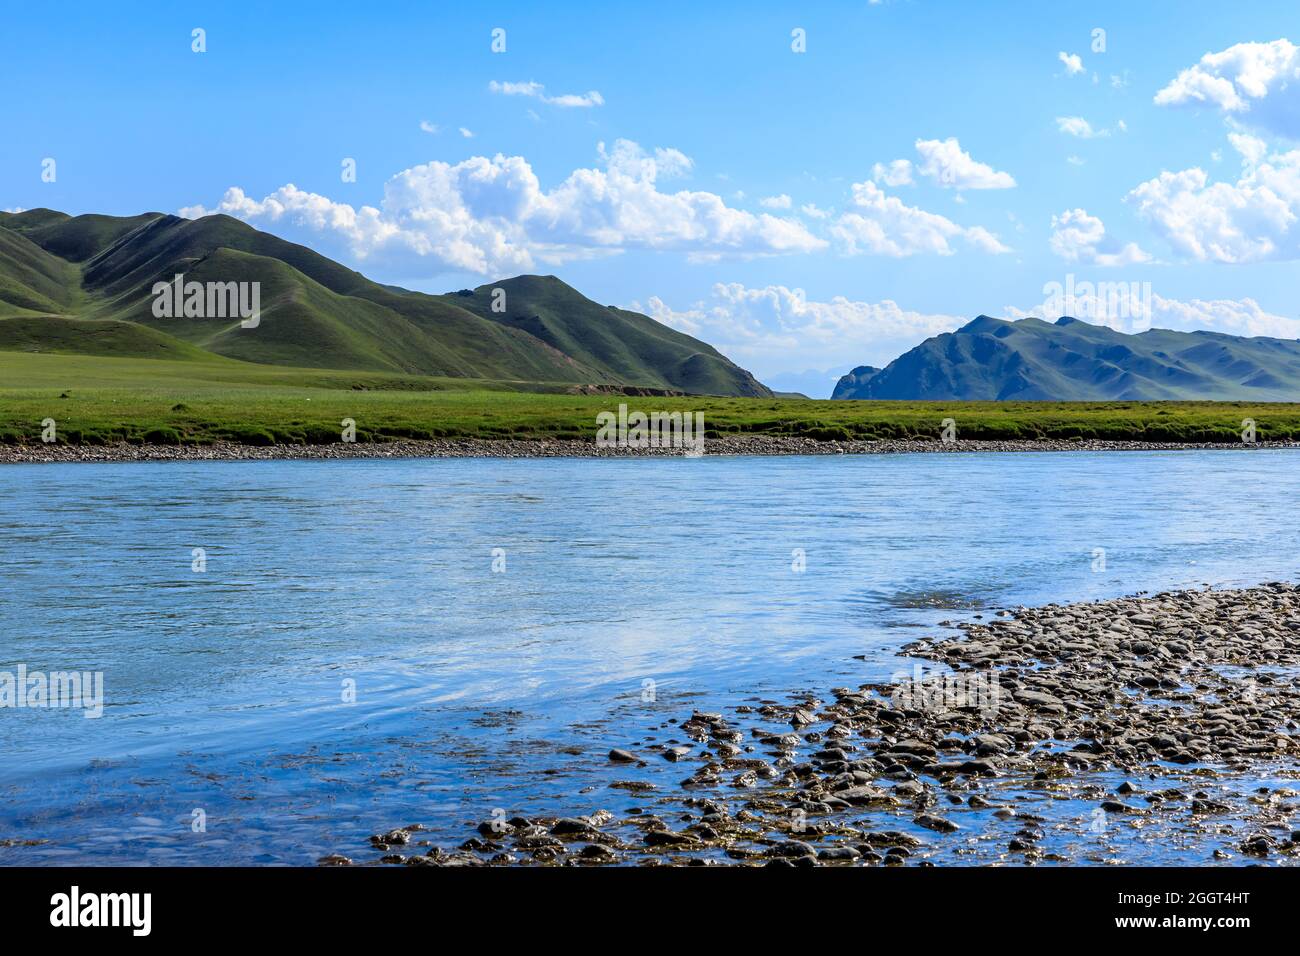 Grassland and river with mountain natural landscape in Xinjiang. Stock Photo